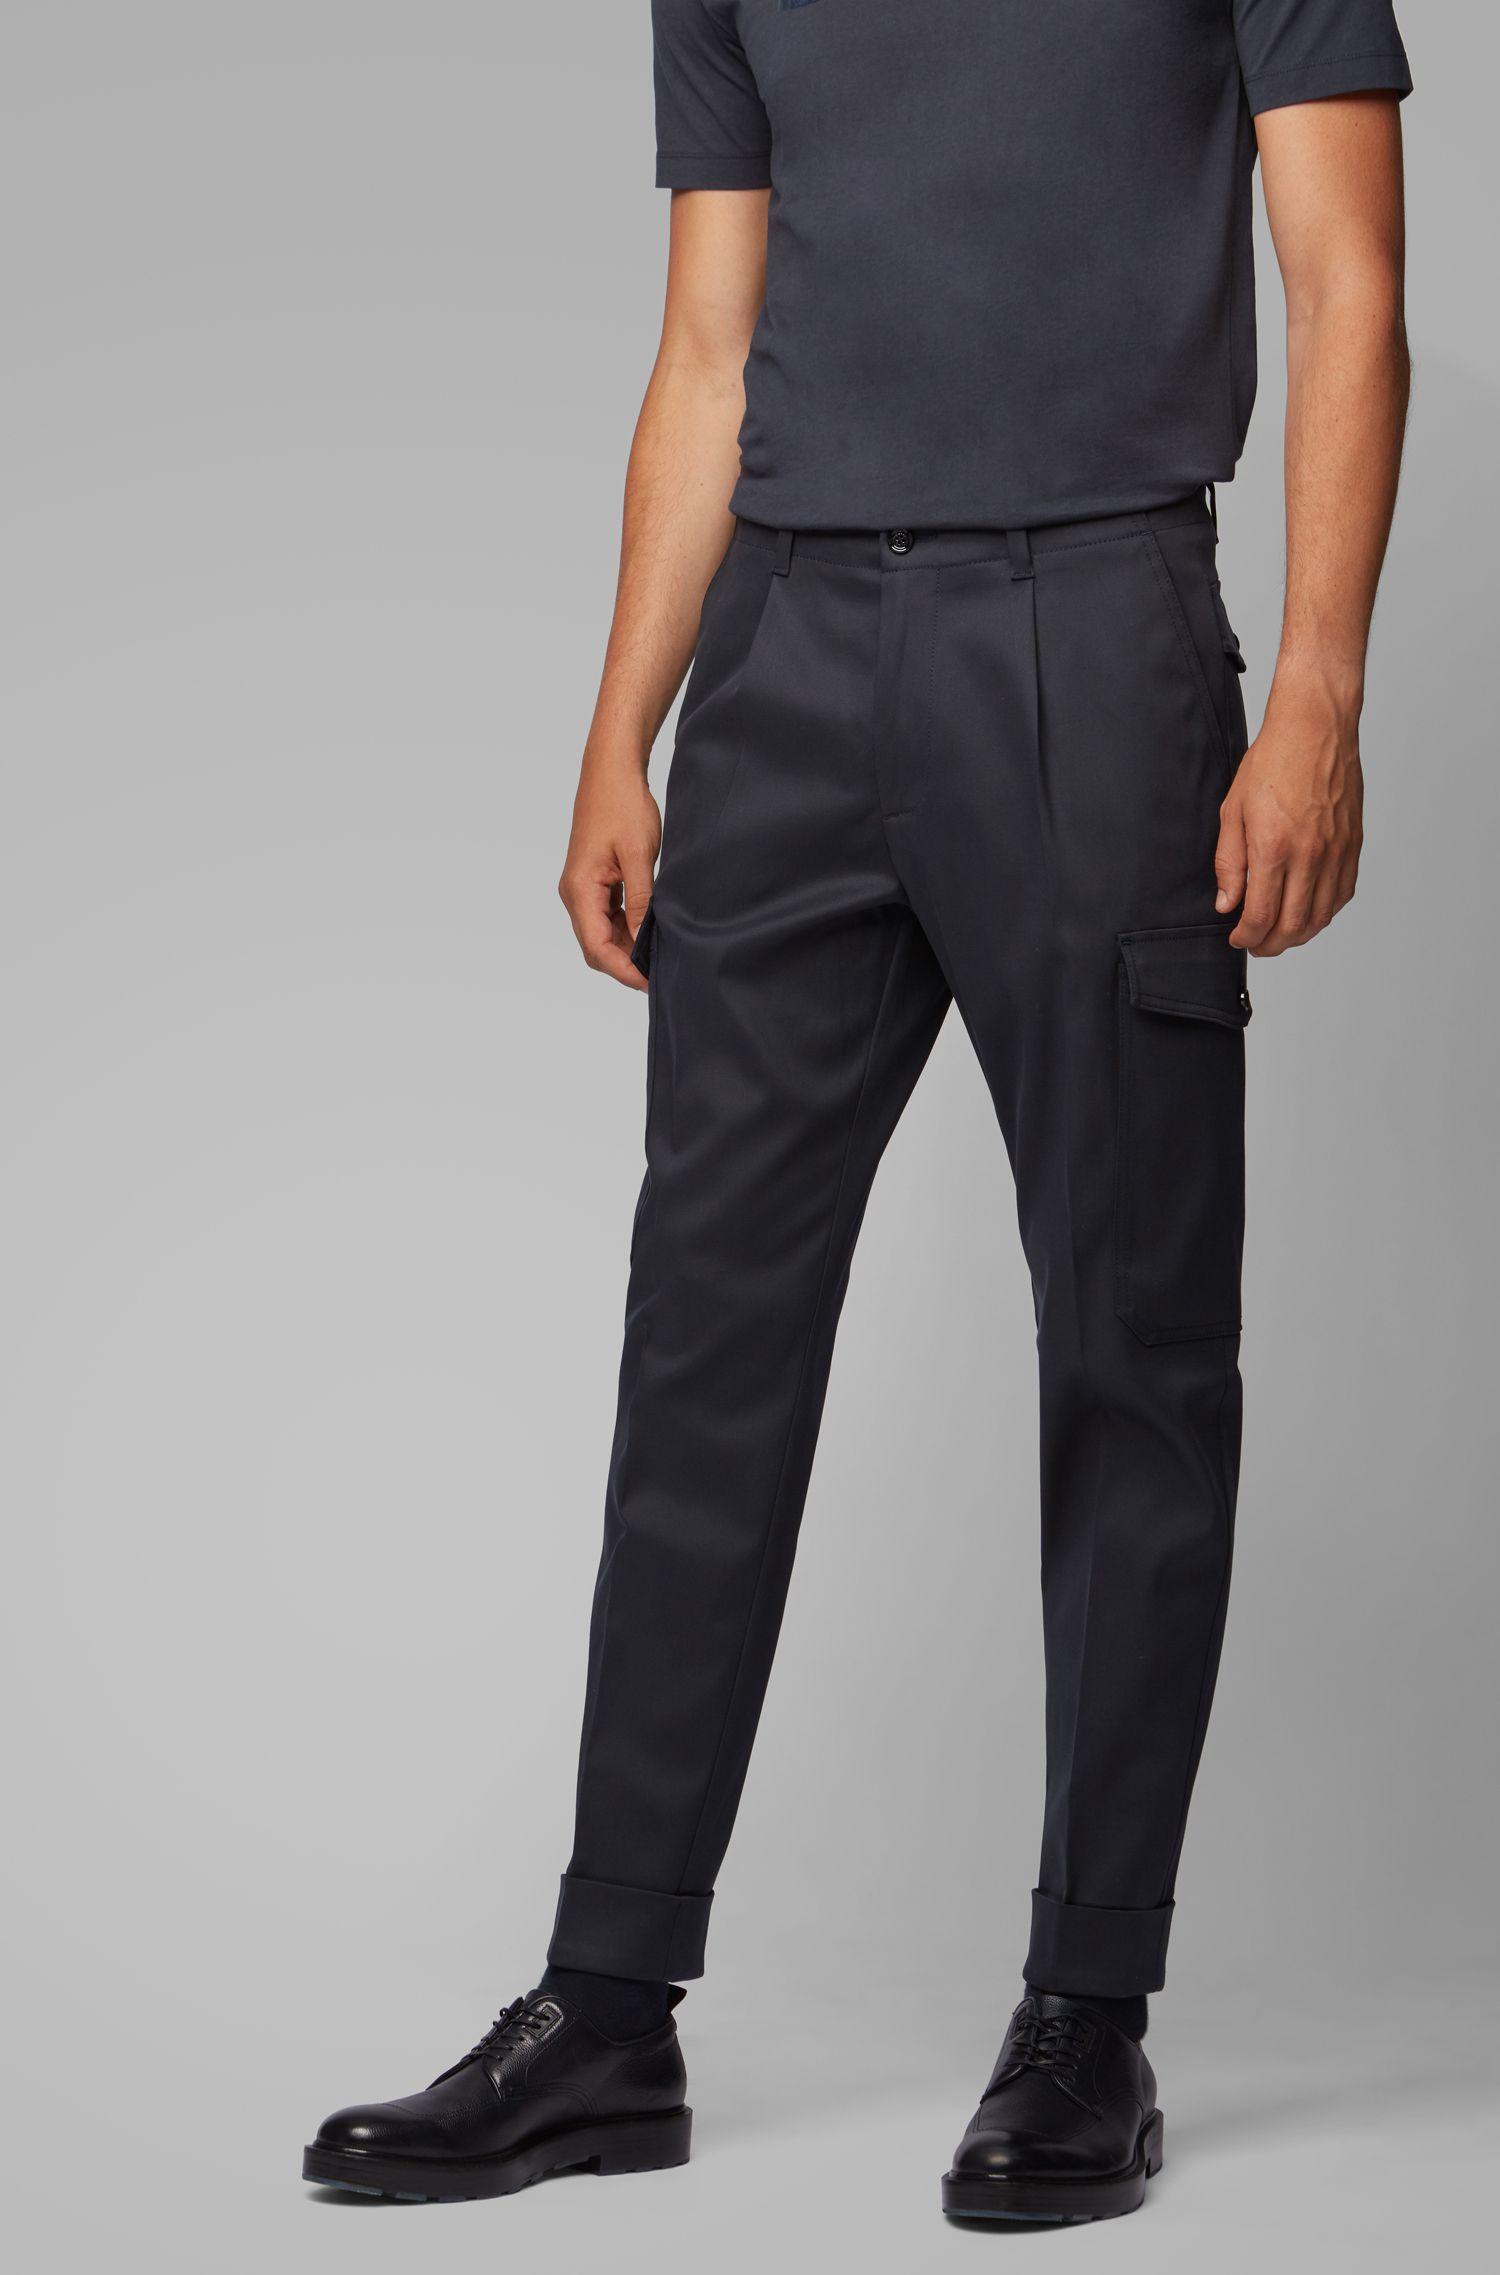 hugo boss cargo trousers Promotions